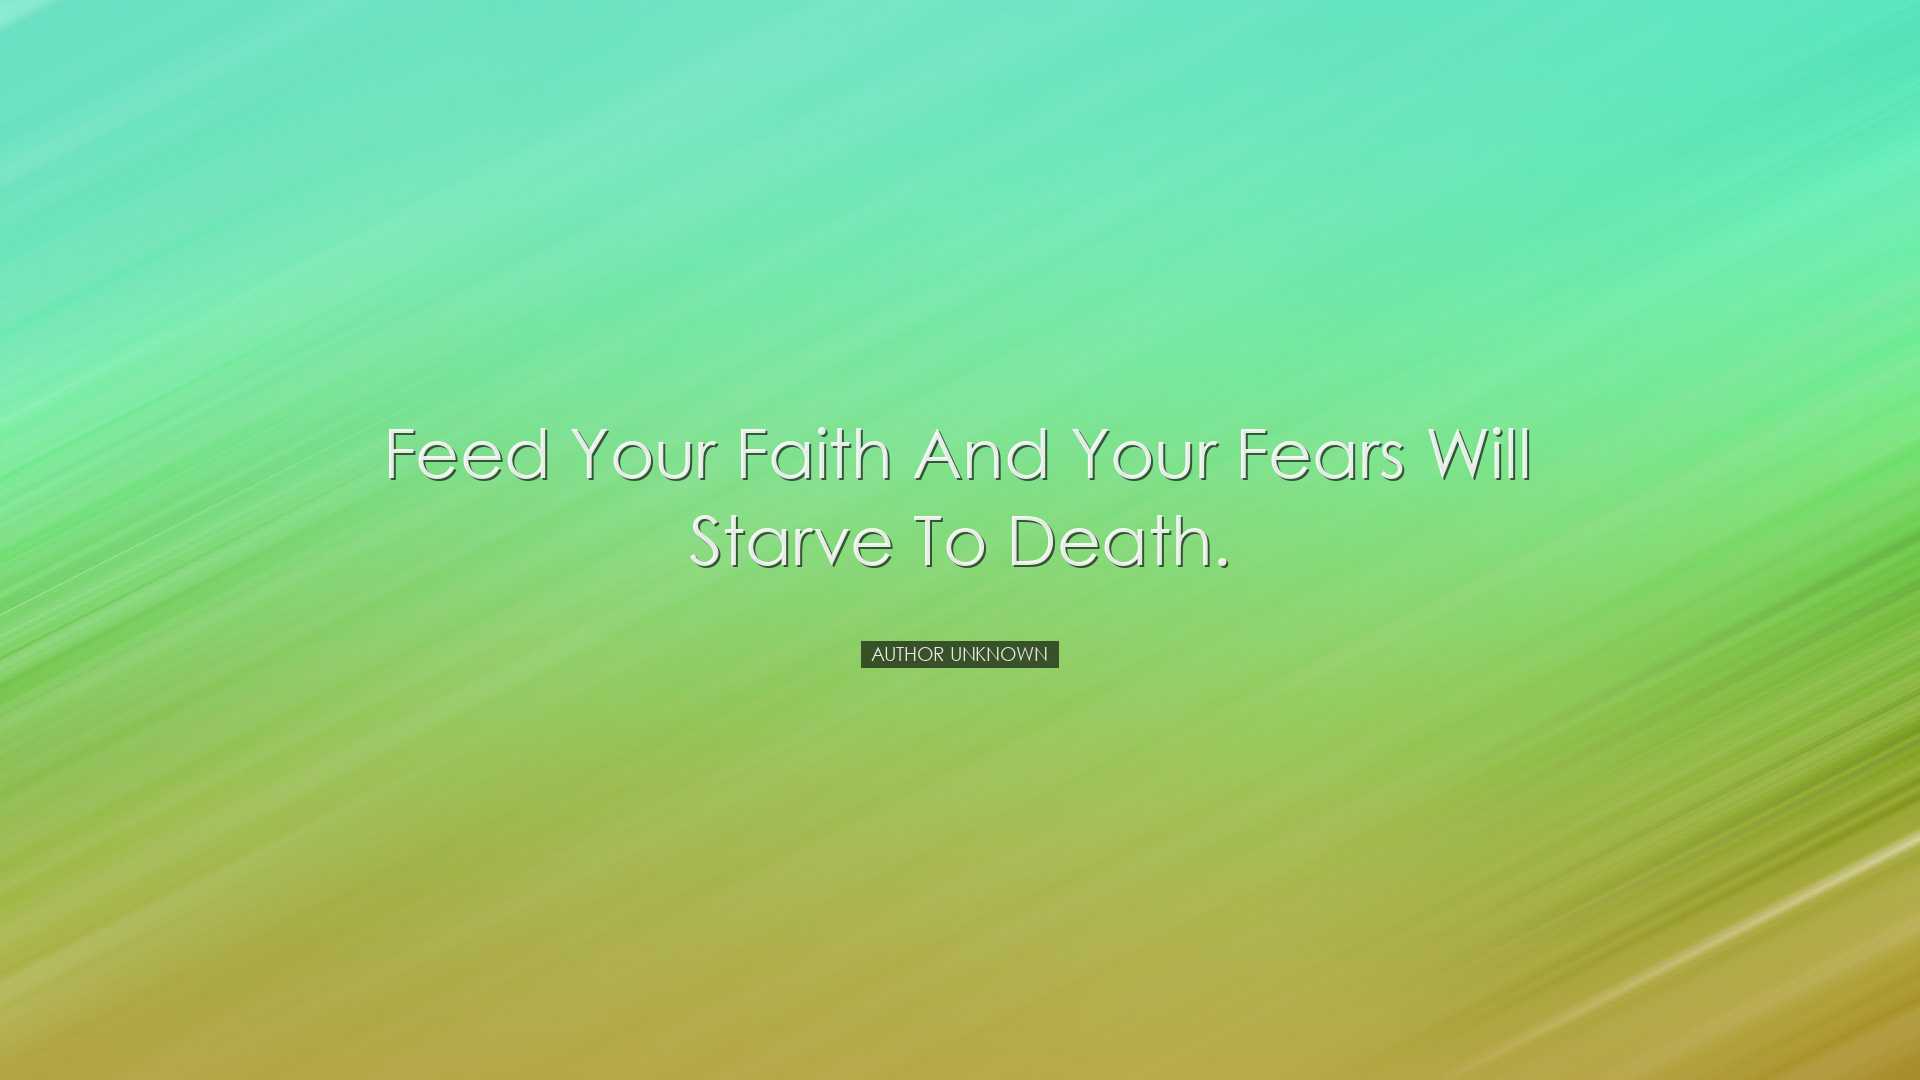 Feed your faith and your fears will starve to death. - Author Unkn